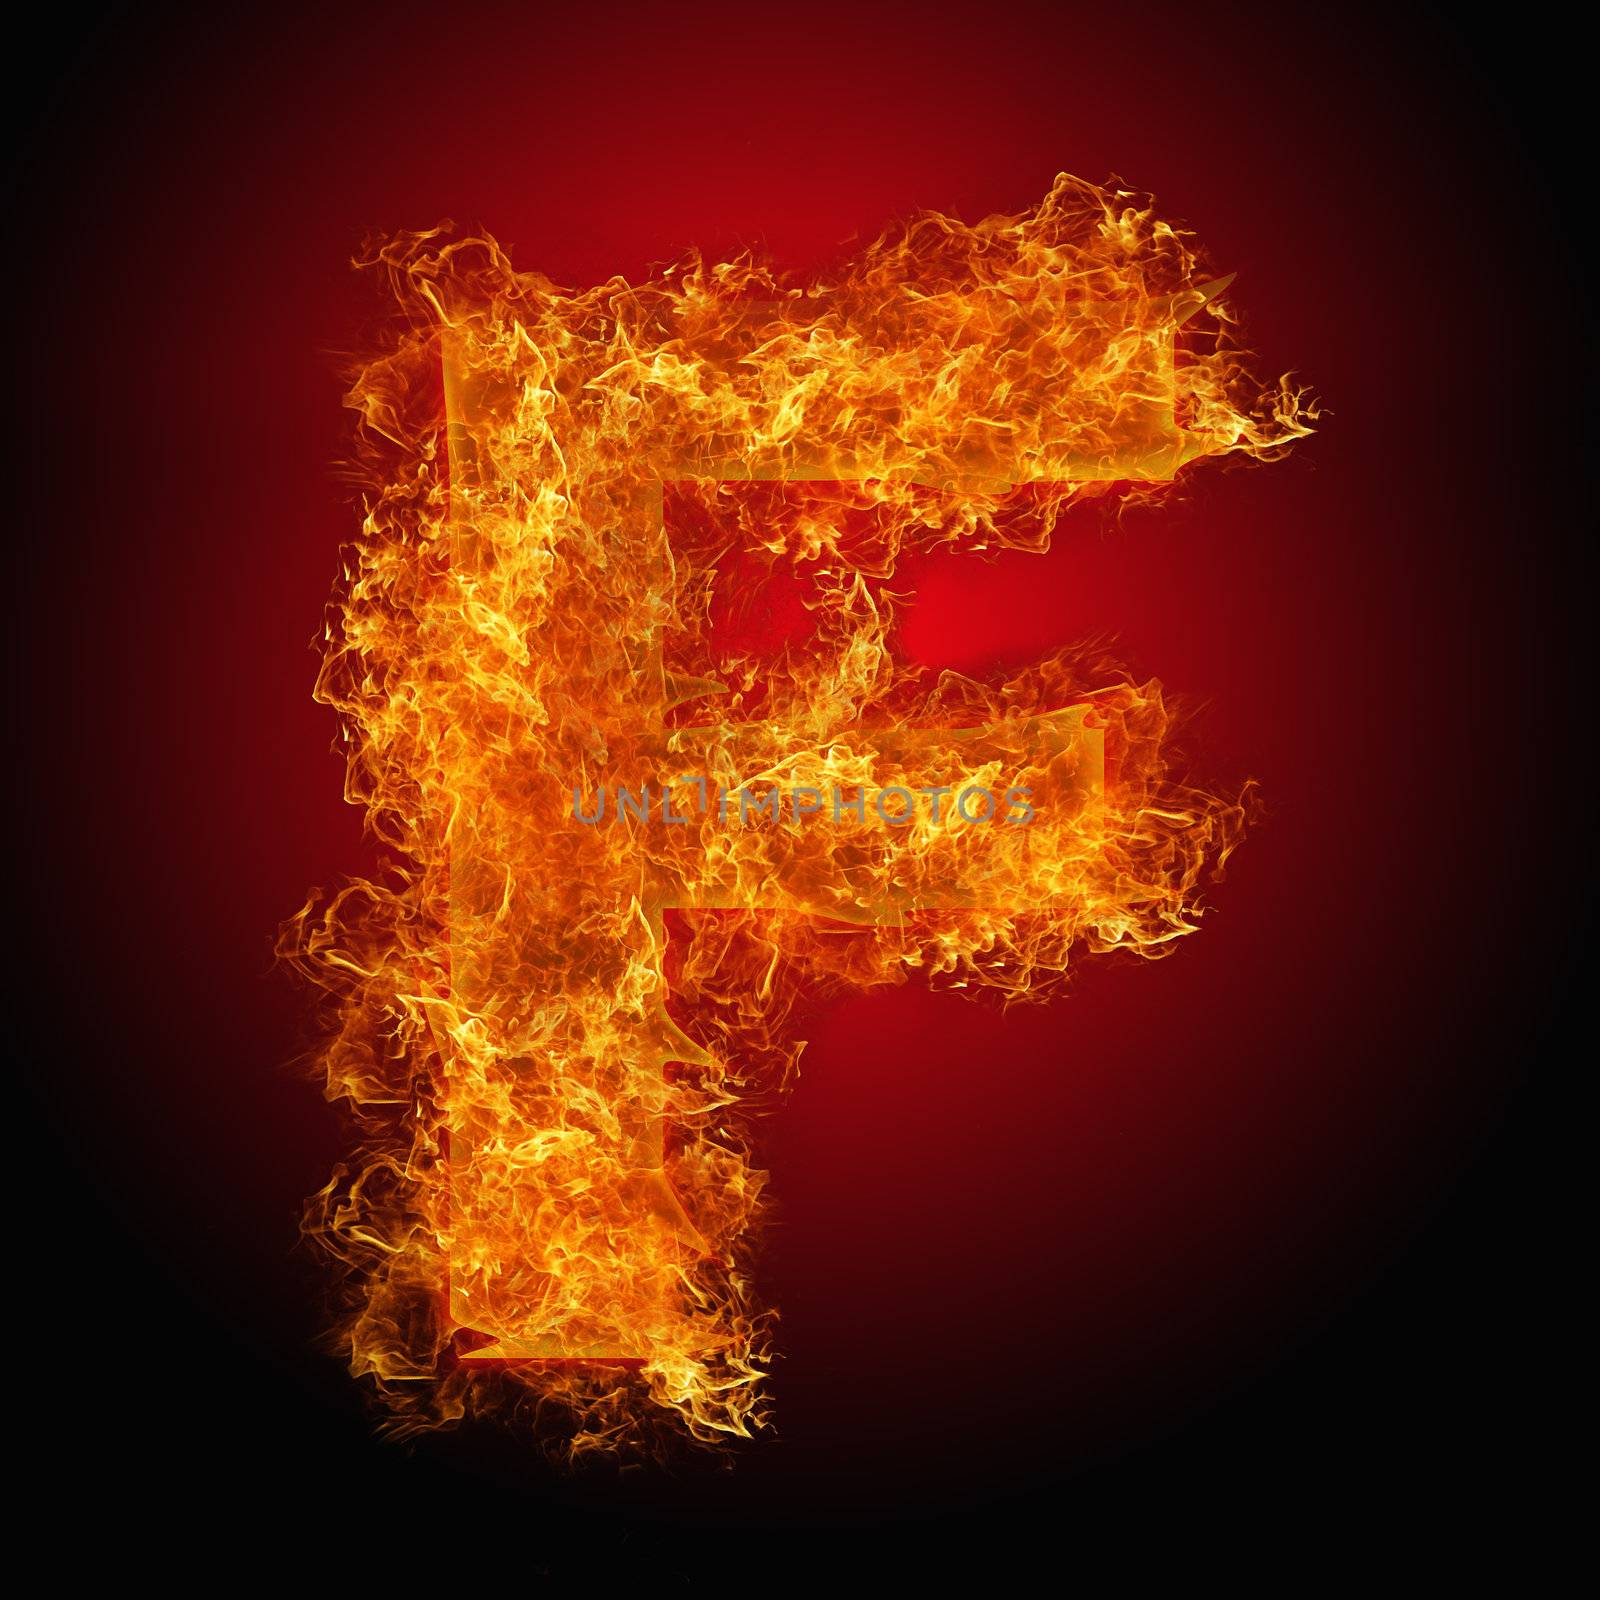 Fire letter F by rusak